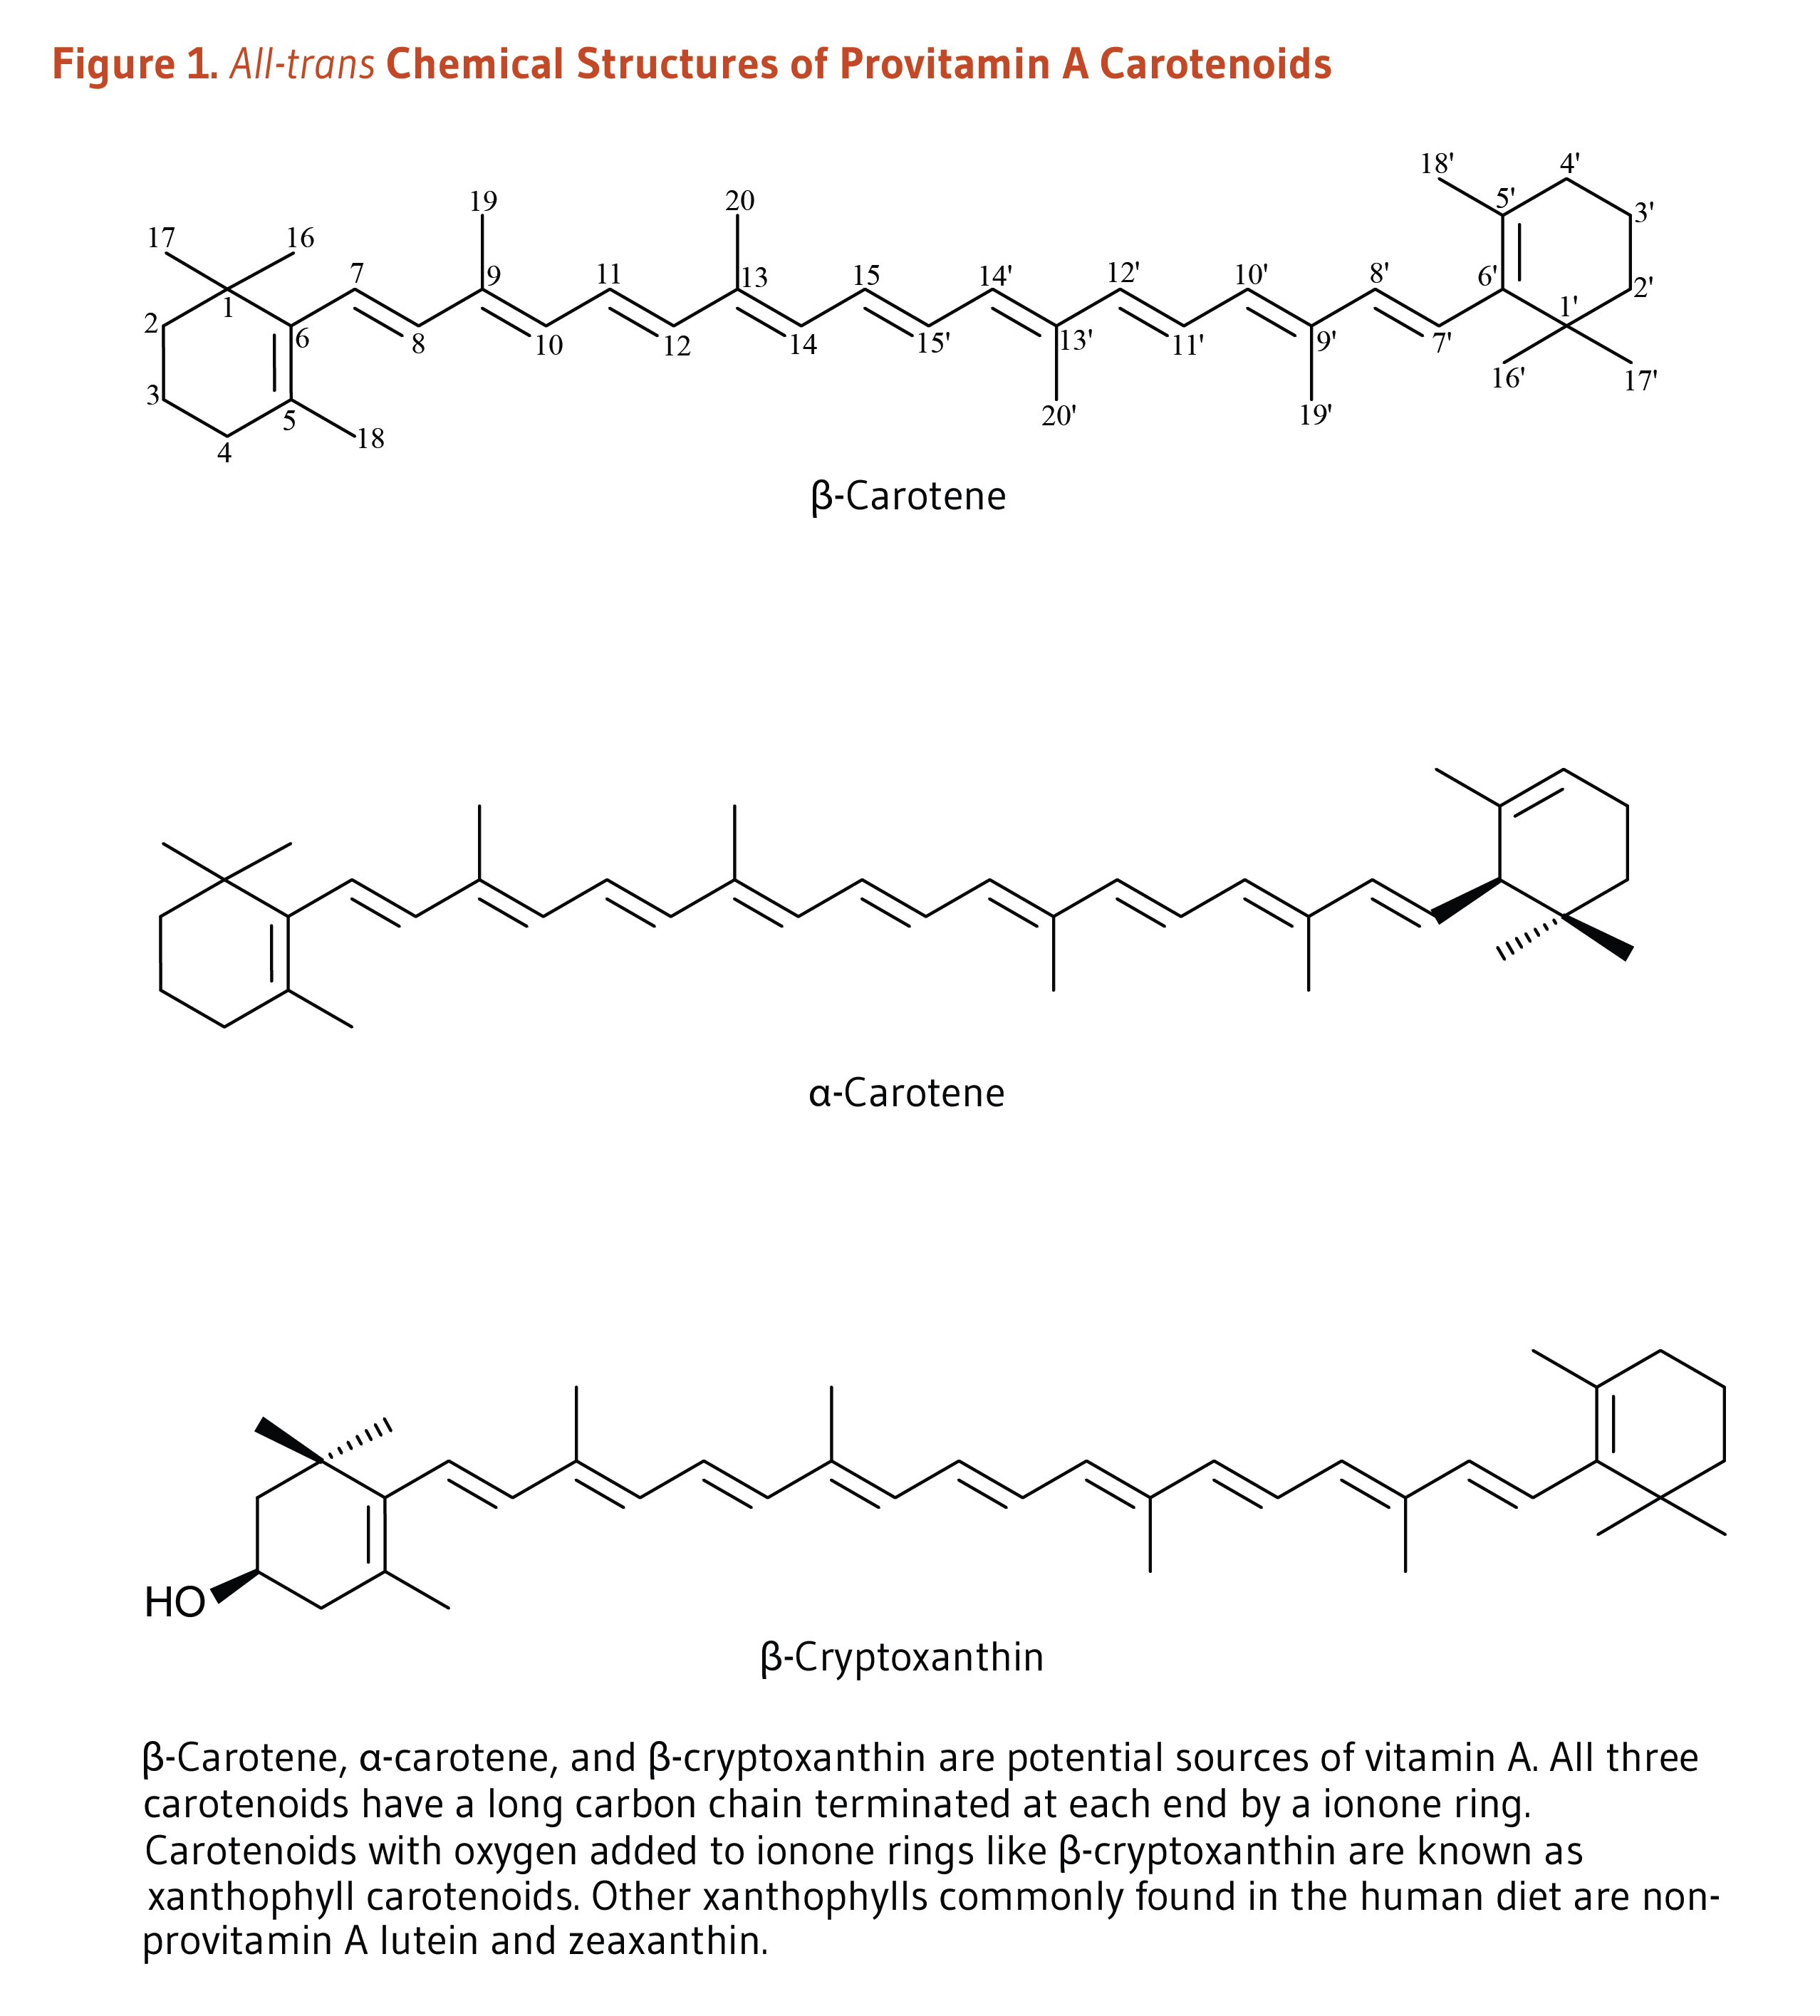 Carotenoids Figure 1. All-trans Chemical Structures of Provitamin A Carotenoids. Beta-carotene, alpha-carotene, and beta-cryptoxanthin are potential sources of vitamin A. All three carotenoids have a long carbon chain terminated at each end by a ionone ring. Carotenoids with oxygen added to ionone rings like beta-cryptoxanthin are known as xanthophyll carotenoids. Other xanthophylls commonly in the human diet are non-provitamin A lutein and zeaxanthin.